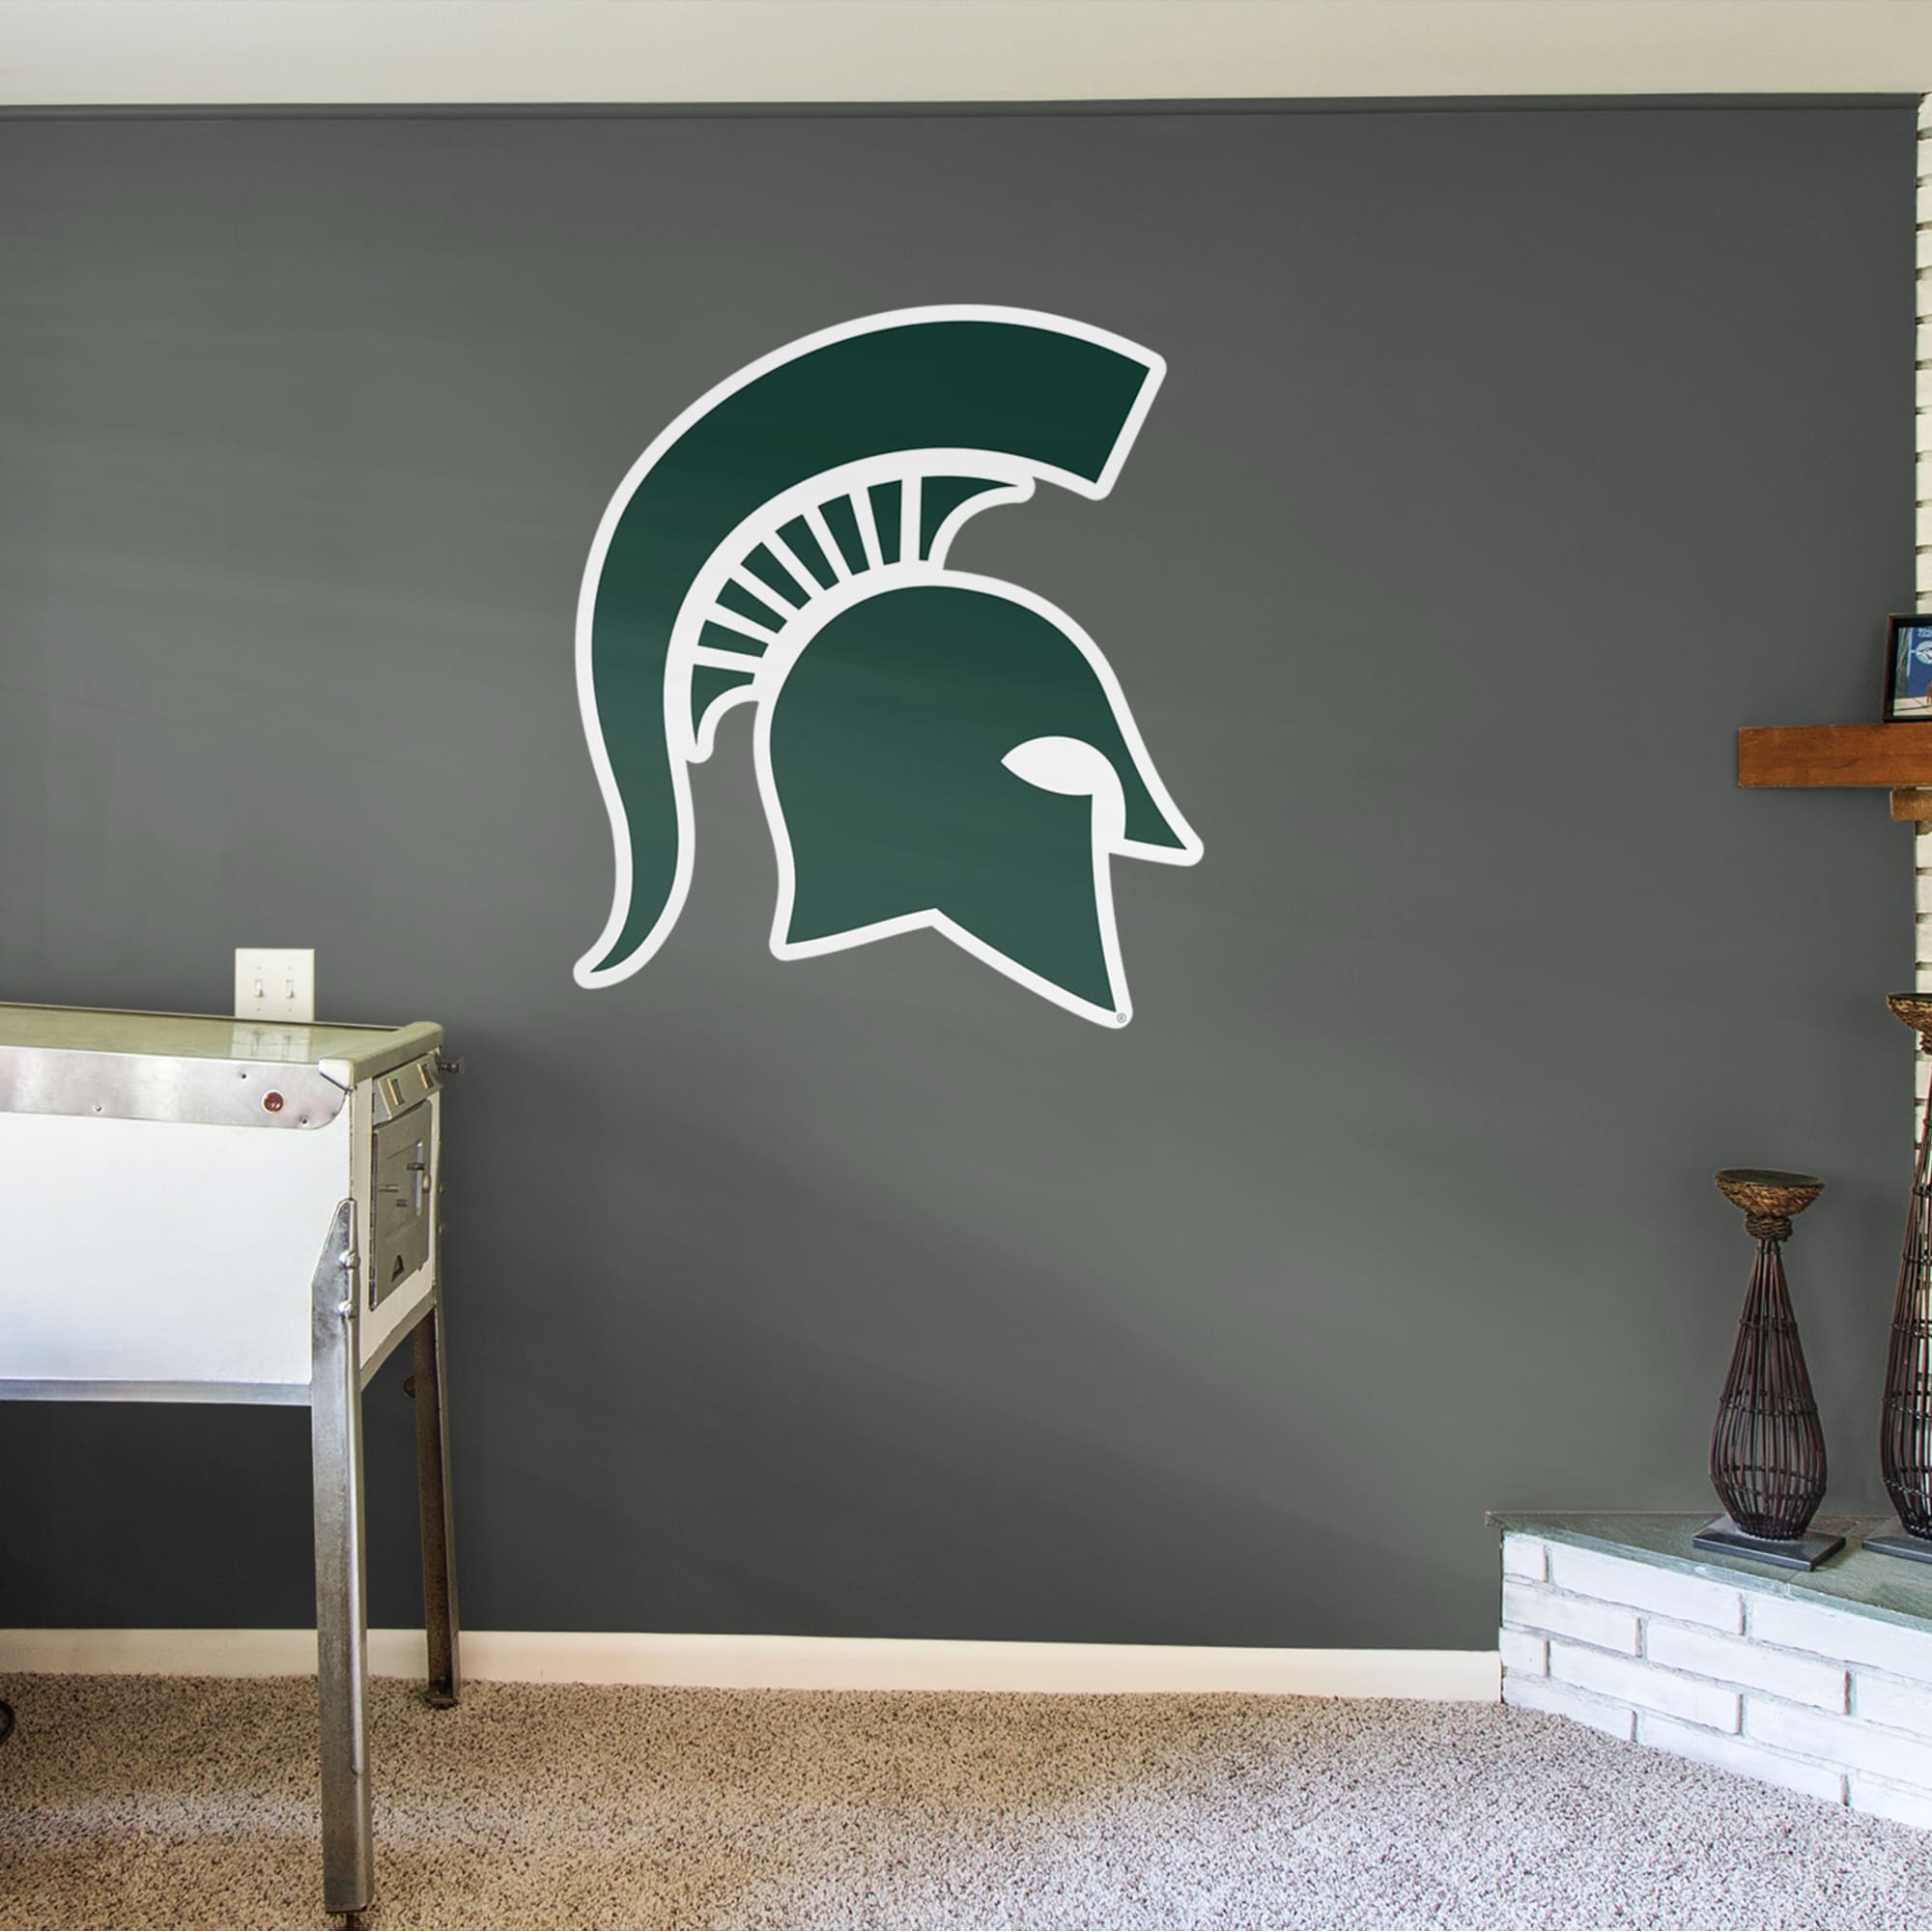 Michigan State Spartans: Logo - Officially Licensed Removable Wall Decal 39.0"W x 44.0"H by Fathead | Vinyl